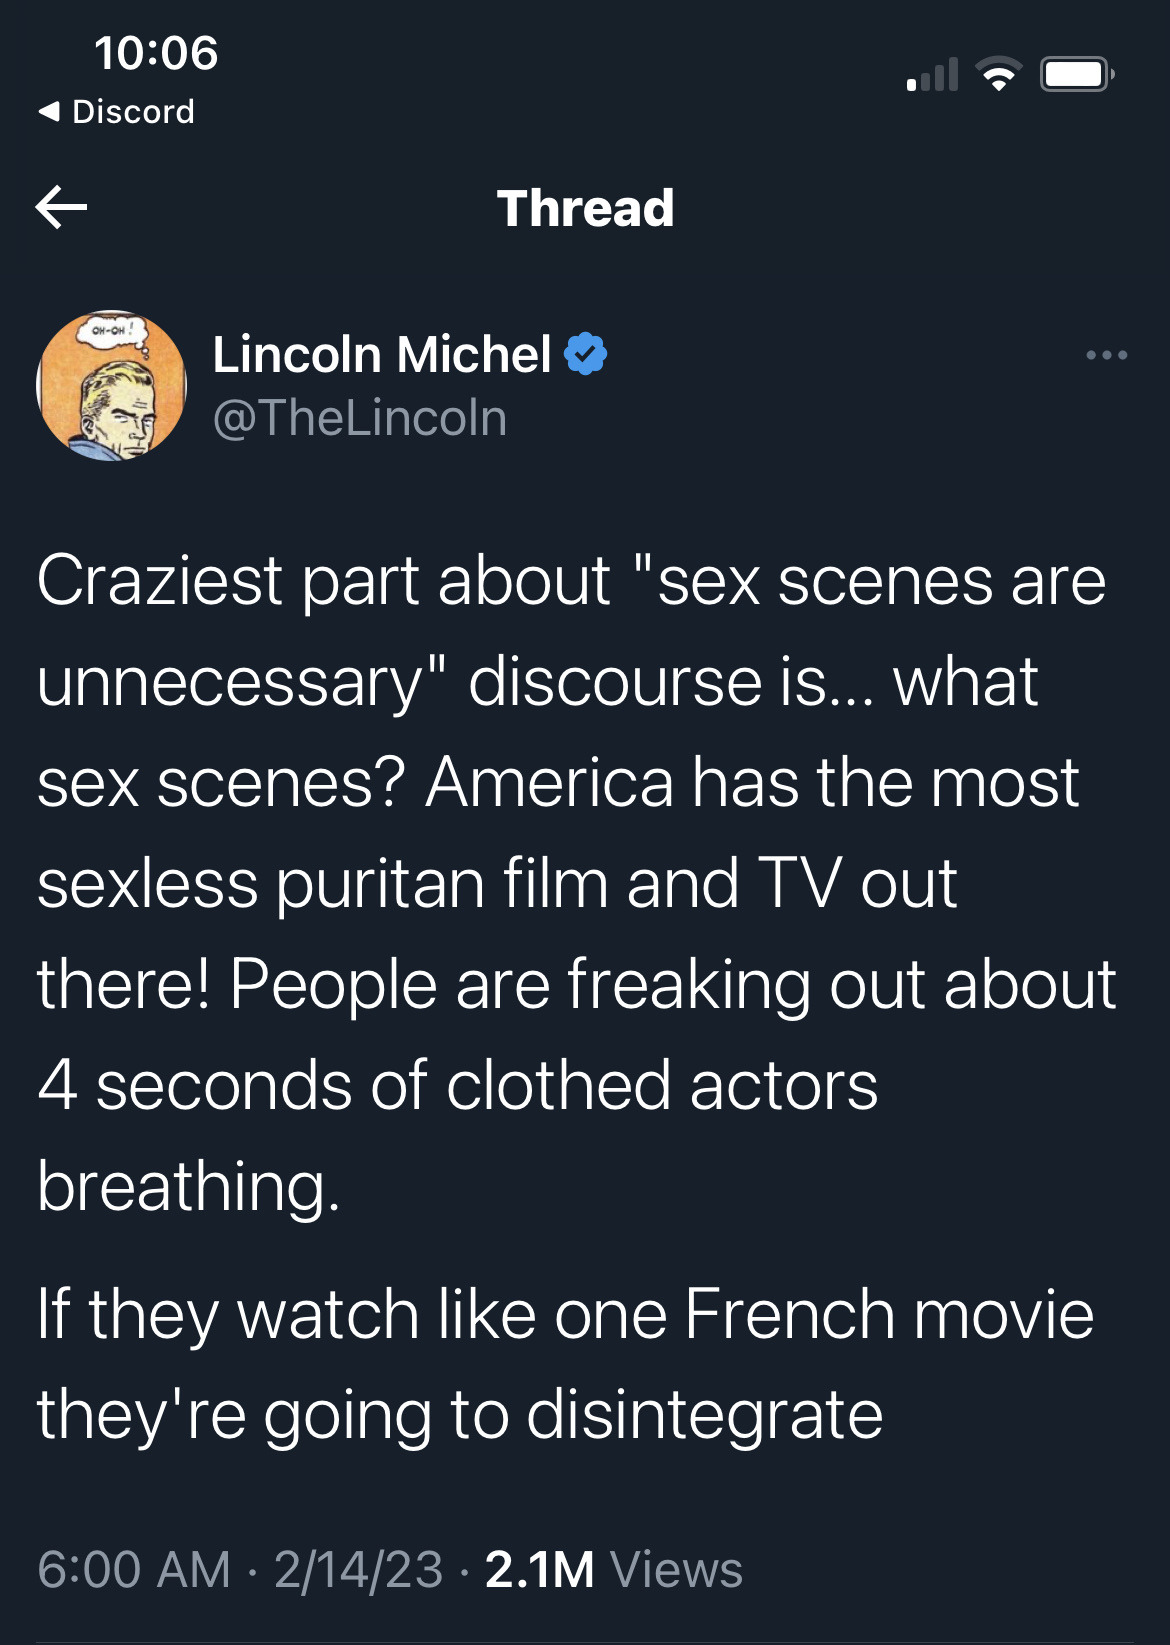 amaditalks:zweihanderblue:memecucker:If there is something that you cannot stand seeing in film or TV, then it’s your responsibility to learn about what you want to watch before you watch it. Media isn’t going to conform to your desires just because